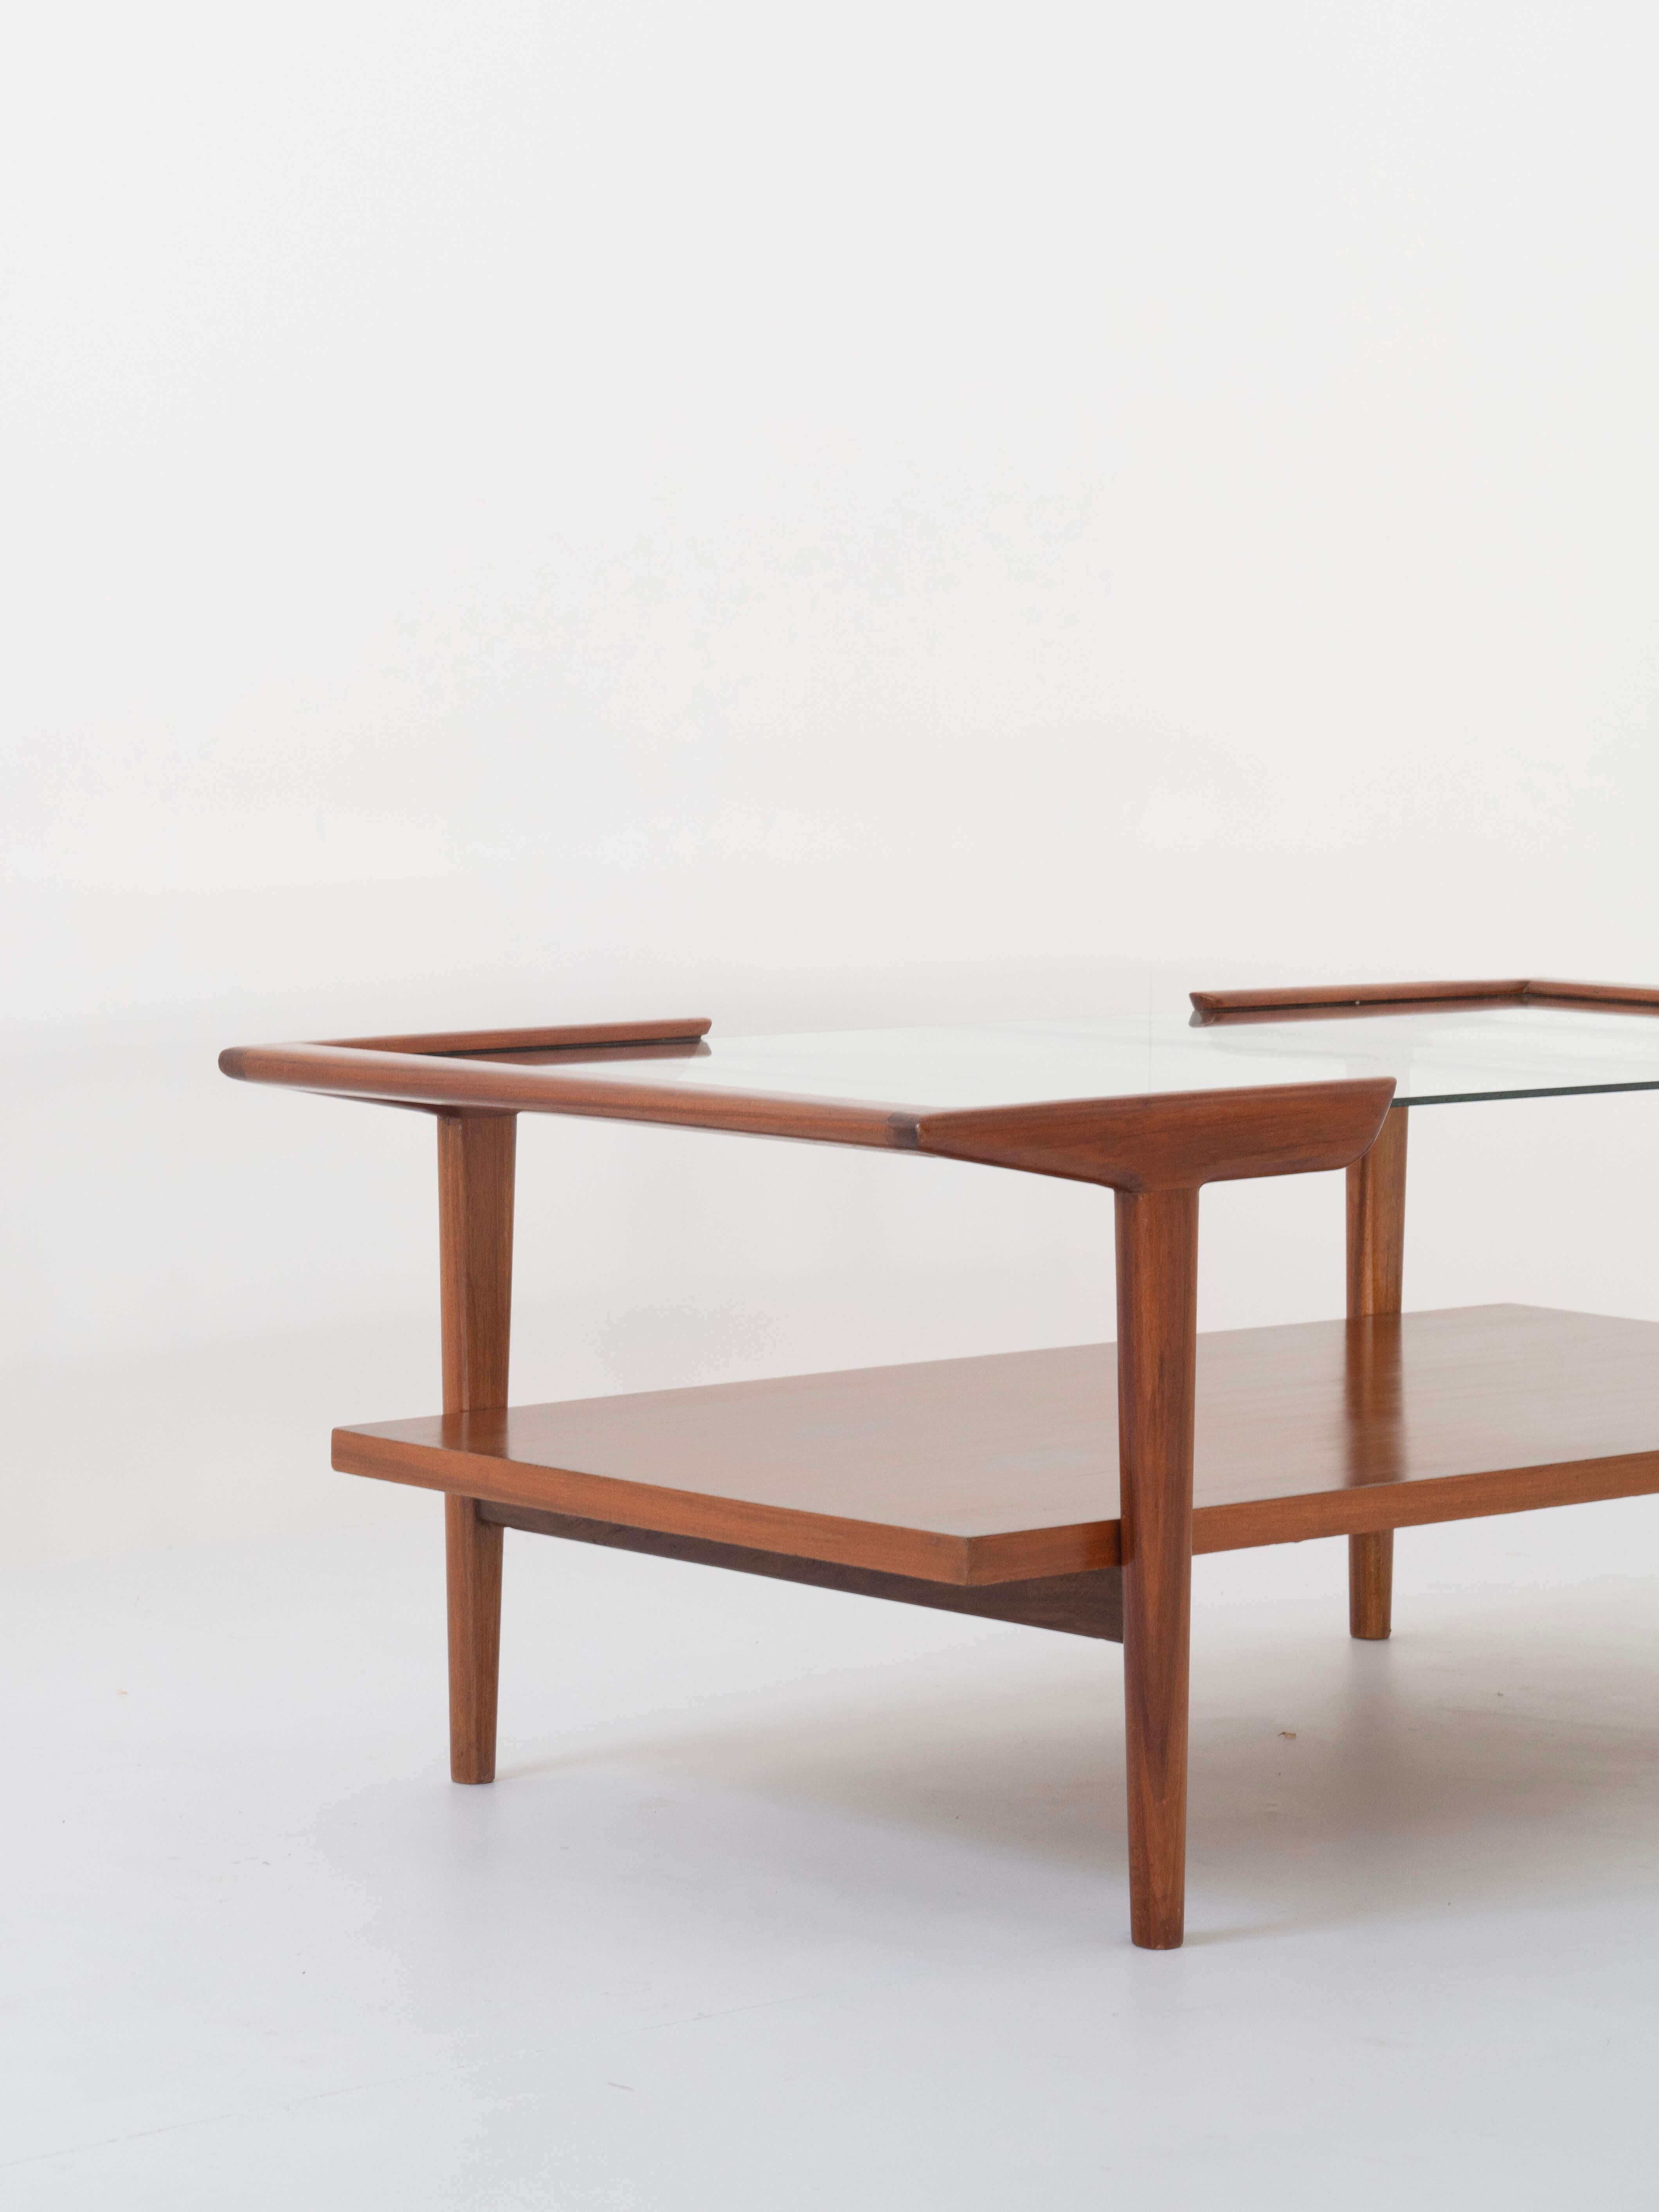 Mid-20th Century Coffee Table in Wood and Glass Attr. to Martin Eisler, Brazil 1950s